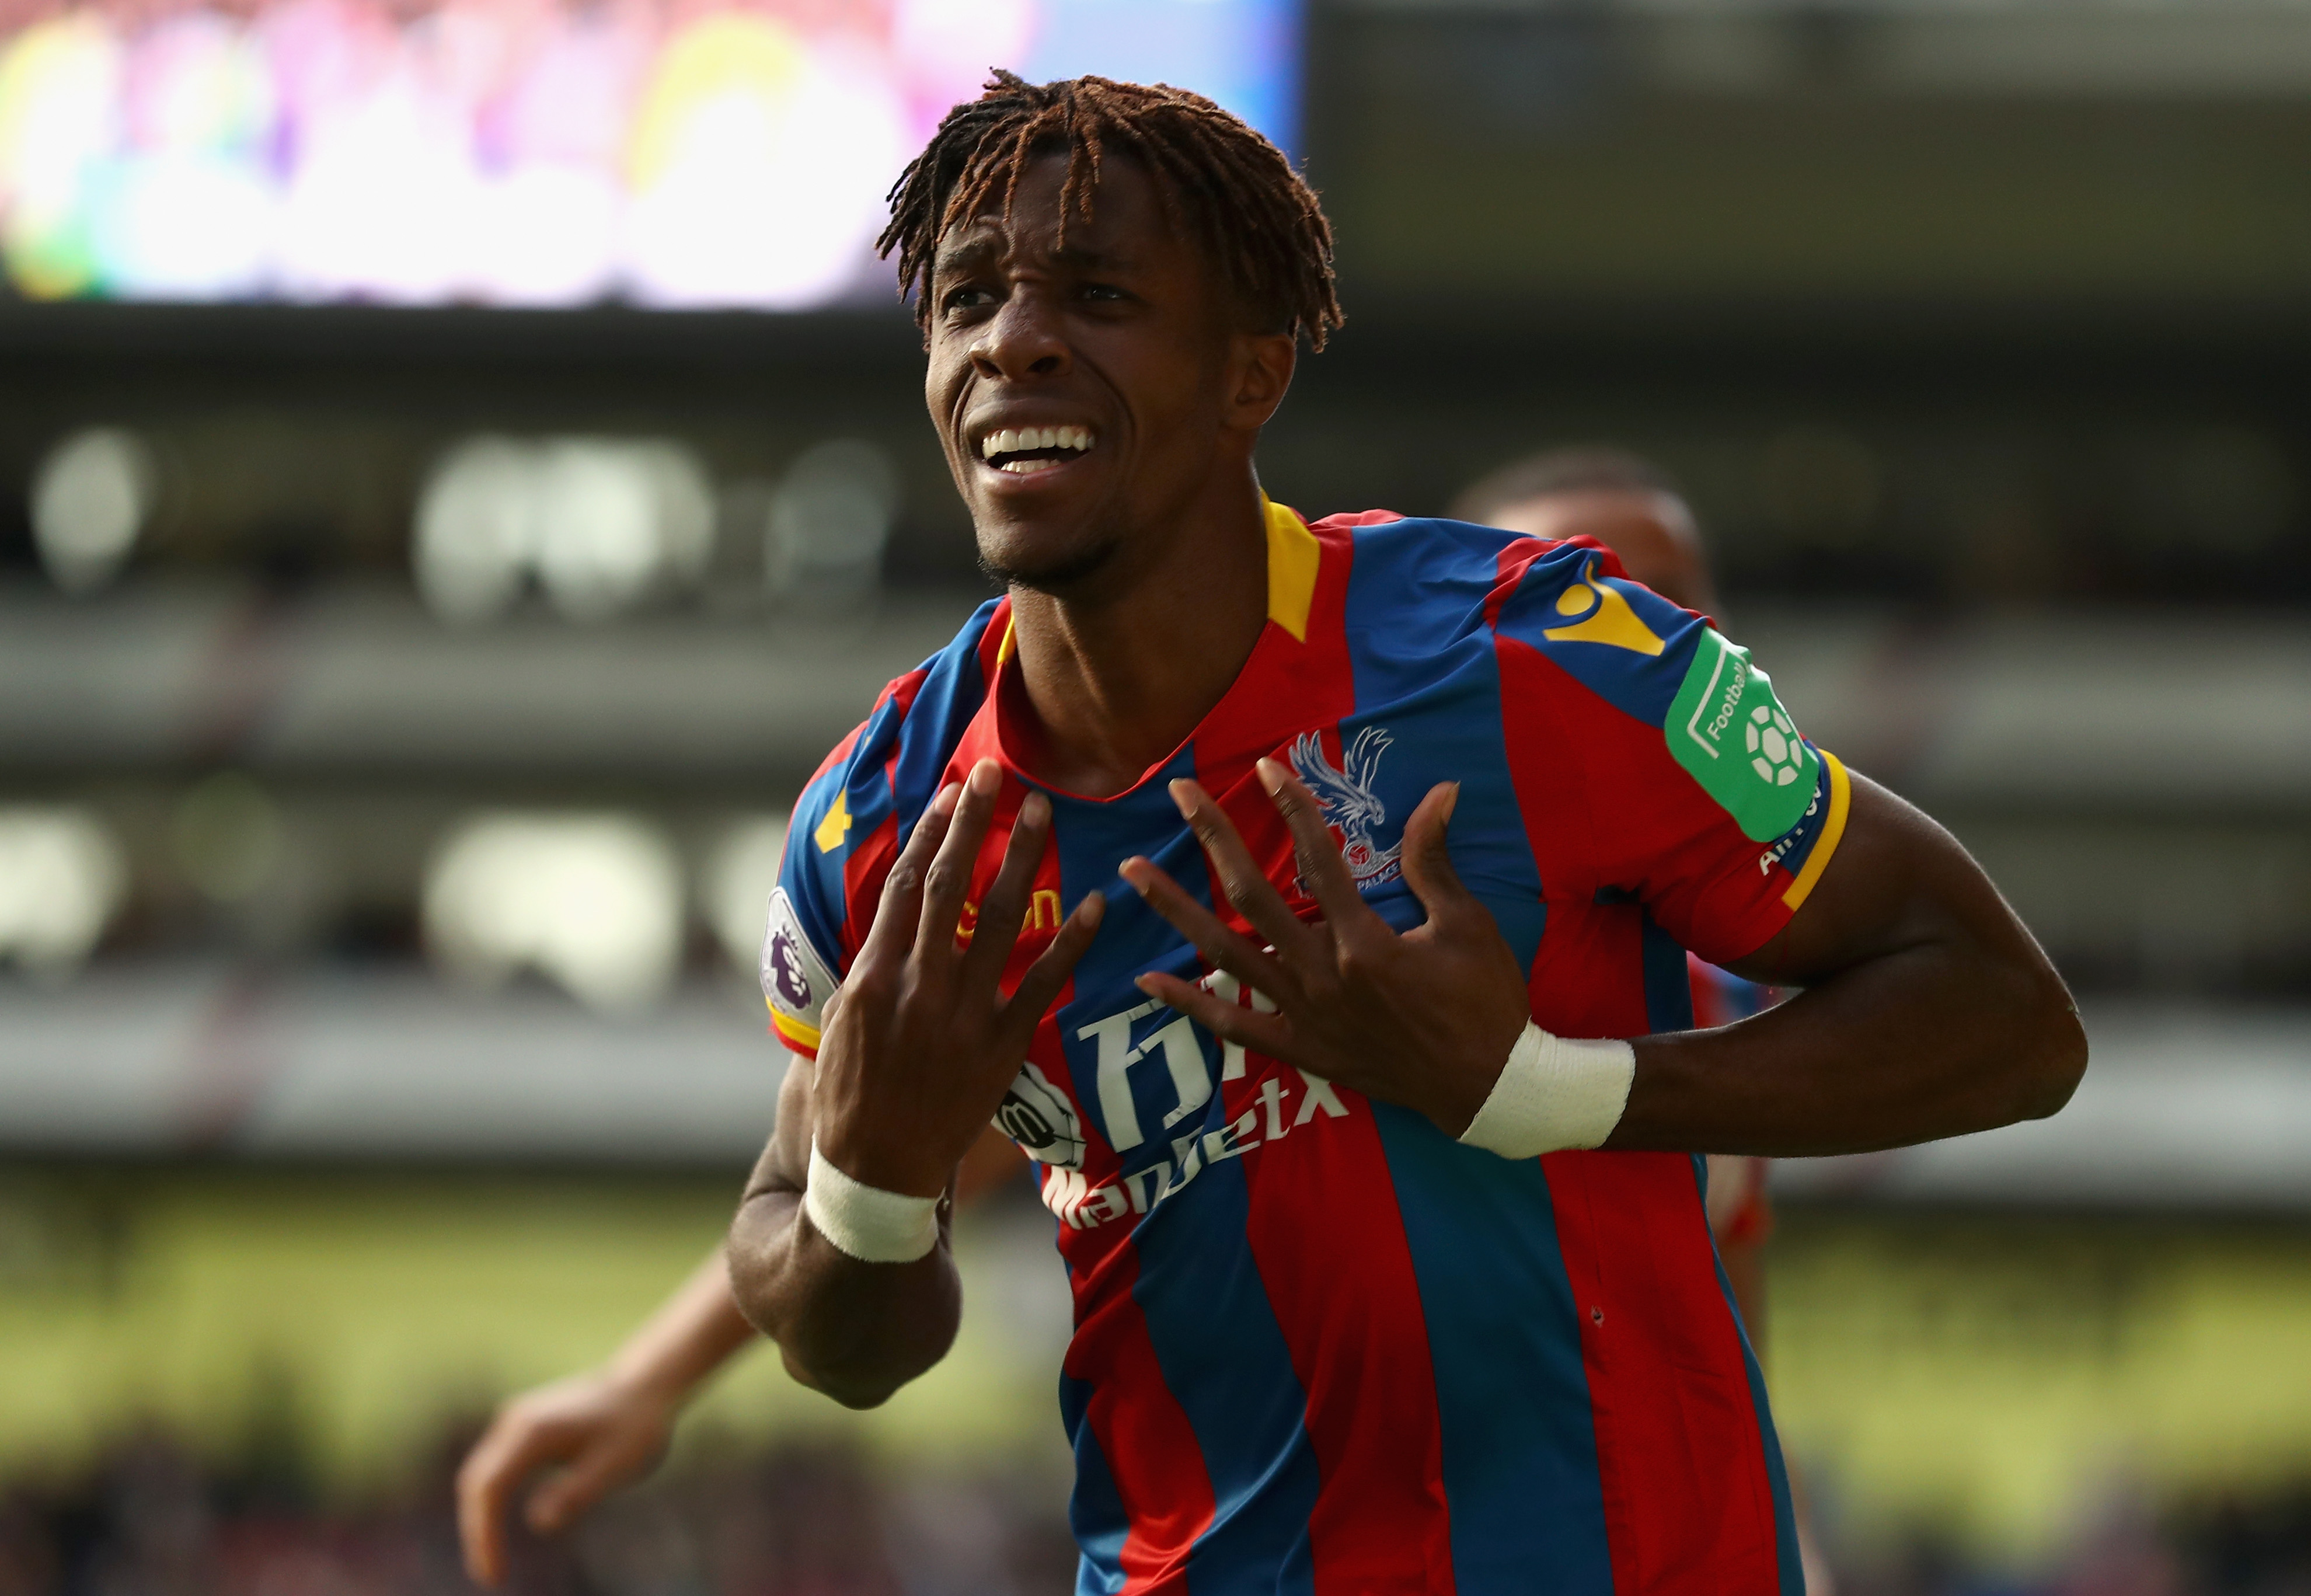 LONDON, ENGLAND - OCTOBER 28:  Wilfried Zaha of Crystal Palace celebrates scoring his sides second goal during the Premier League match between Crystal Palace and West Ham United at Selhurst Park on October 28, 2017 in London, England.  (Photo by Bryn Lennon/Getty Images)